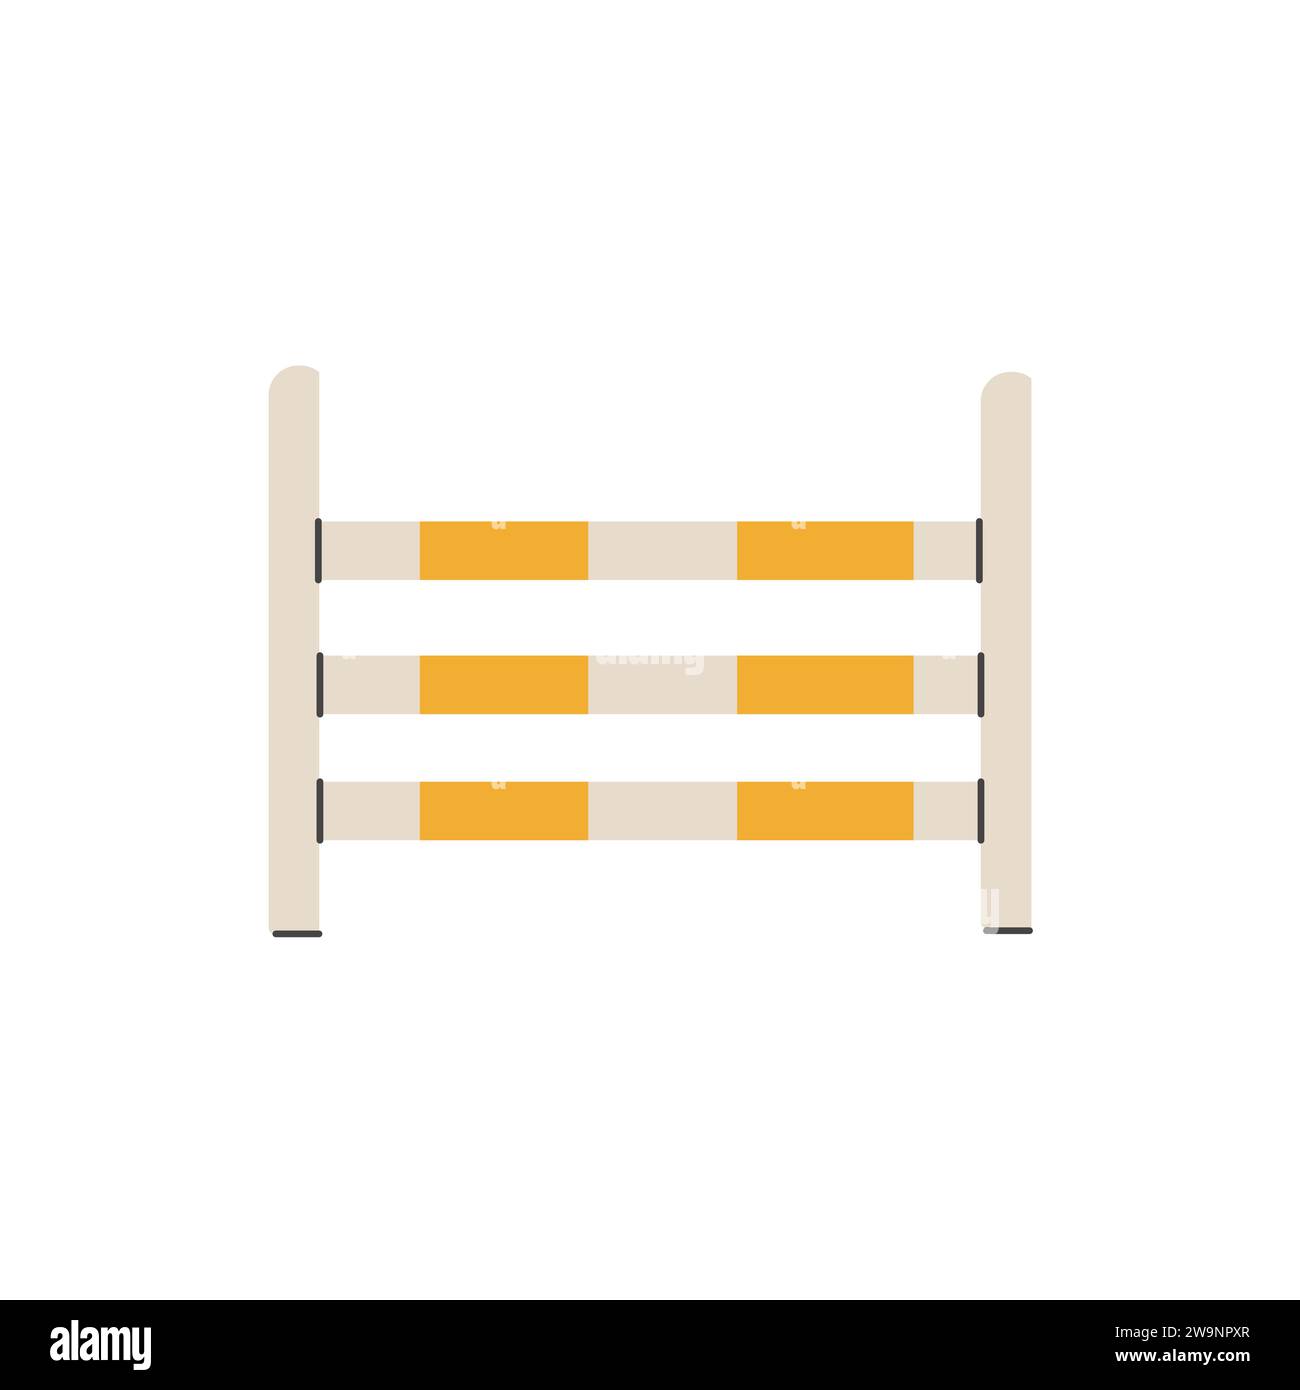 Horse jumping obstacle. Equestrian show jumping. Equine sports. Horse stables equipment. Vector illustration colored flat hand drawn isolated on white Stock Vector